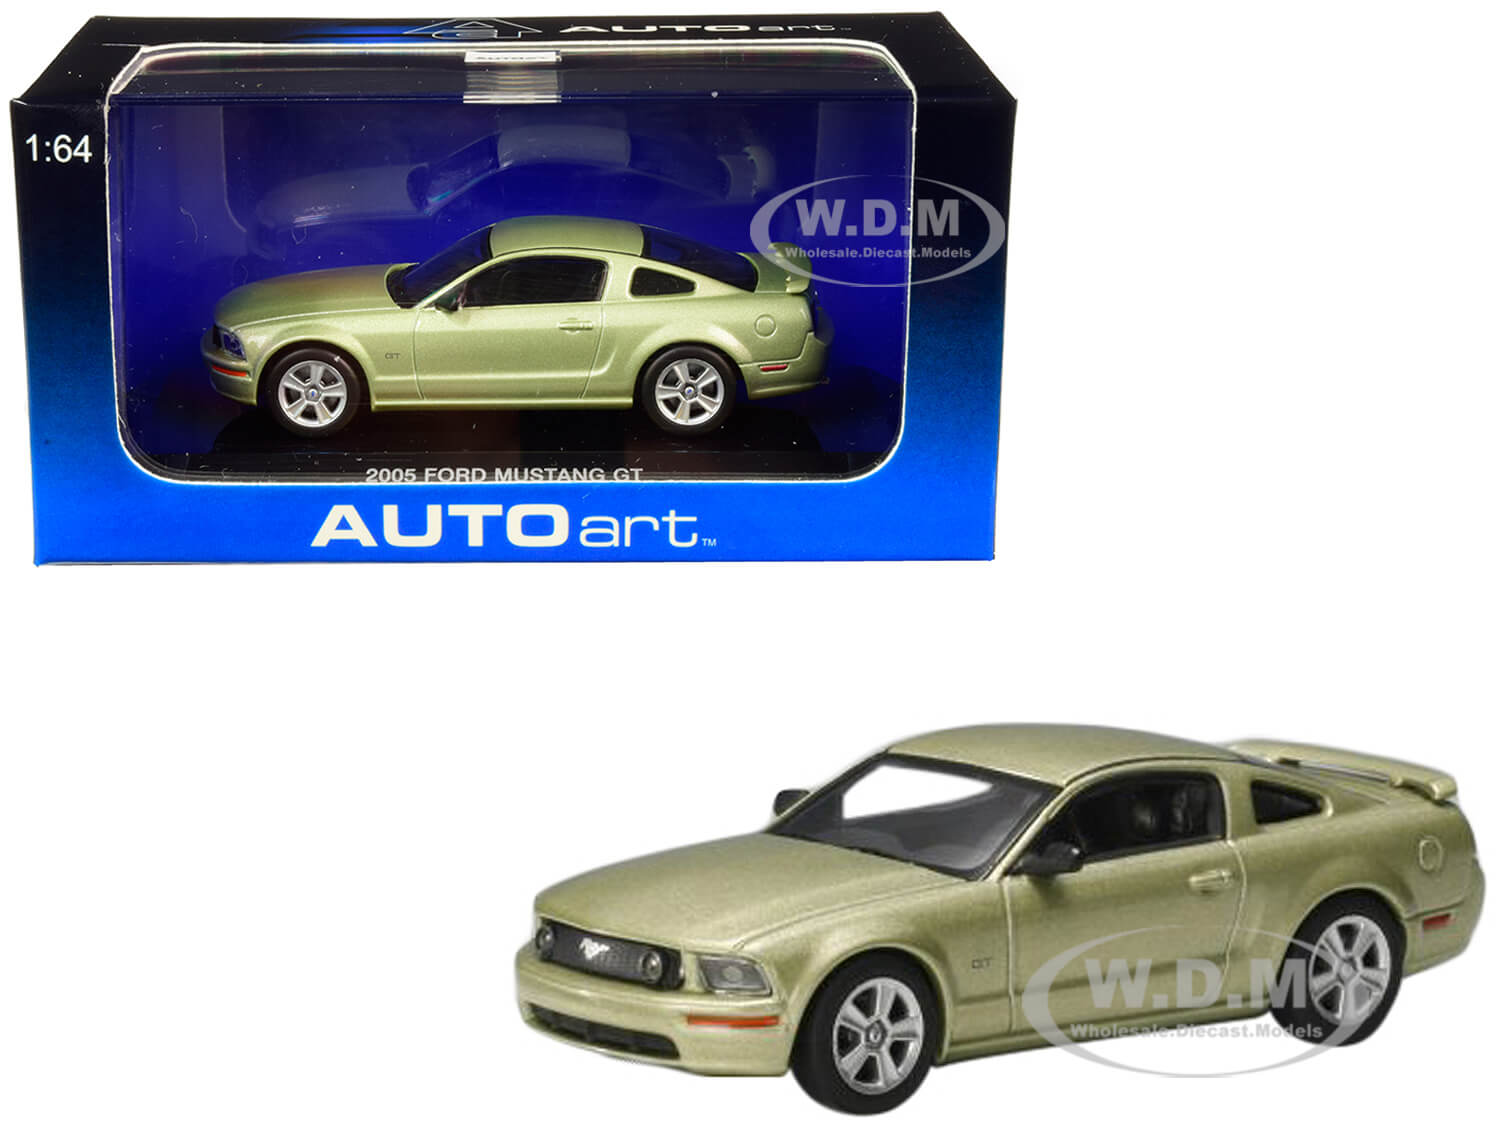 2005 Ford Mustang Gt Legend Lime Green Metallic (2004 Auto Show Version) 1/64 Diecast Model Car By Autoart